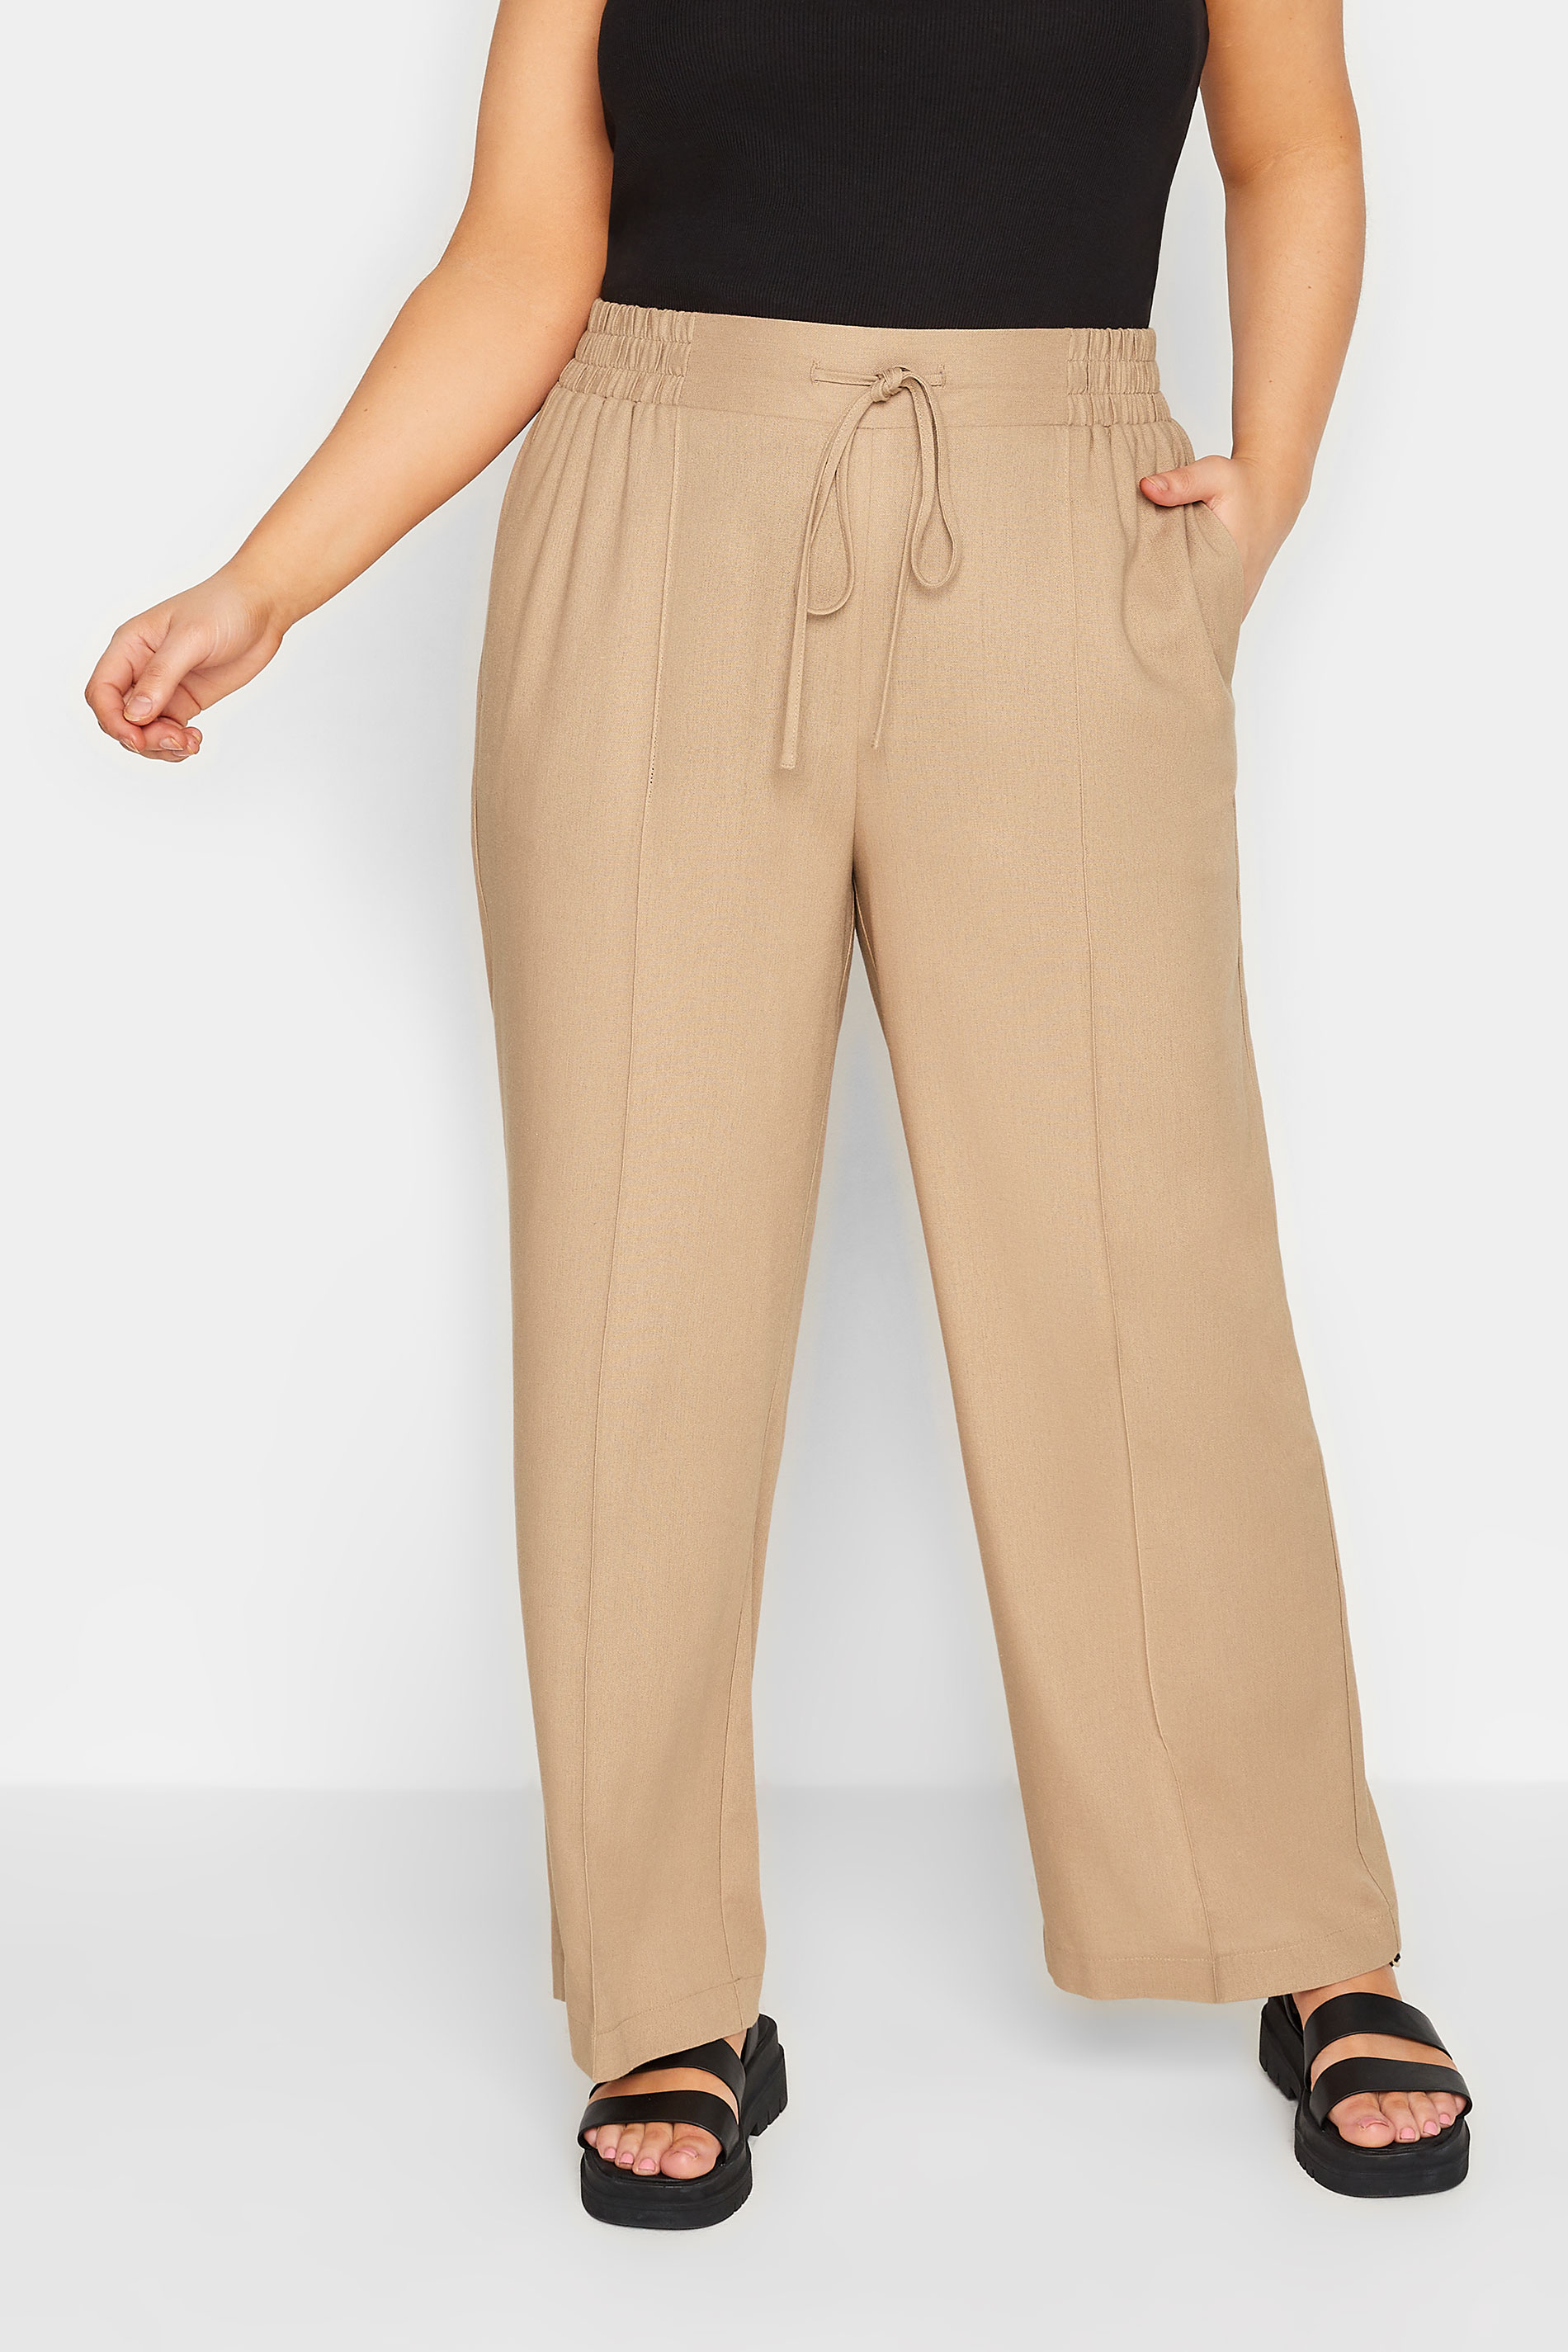 YOURS Curve Plus Size Beige Brown Wide Leg Linen Trousers | Yours Clothing  1